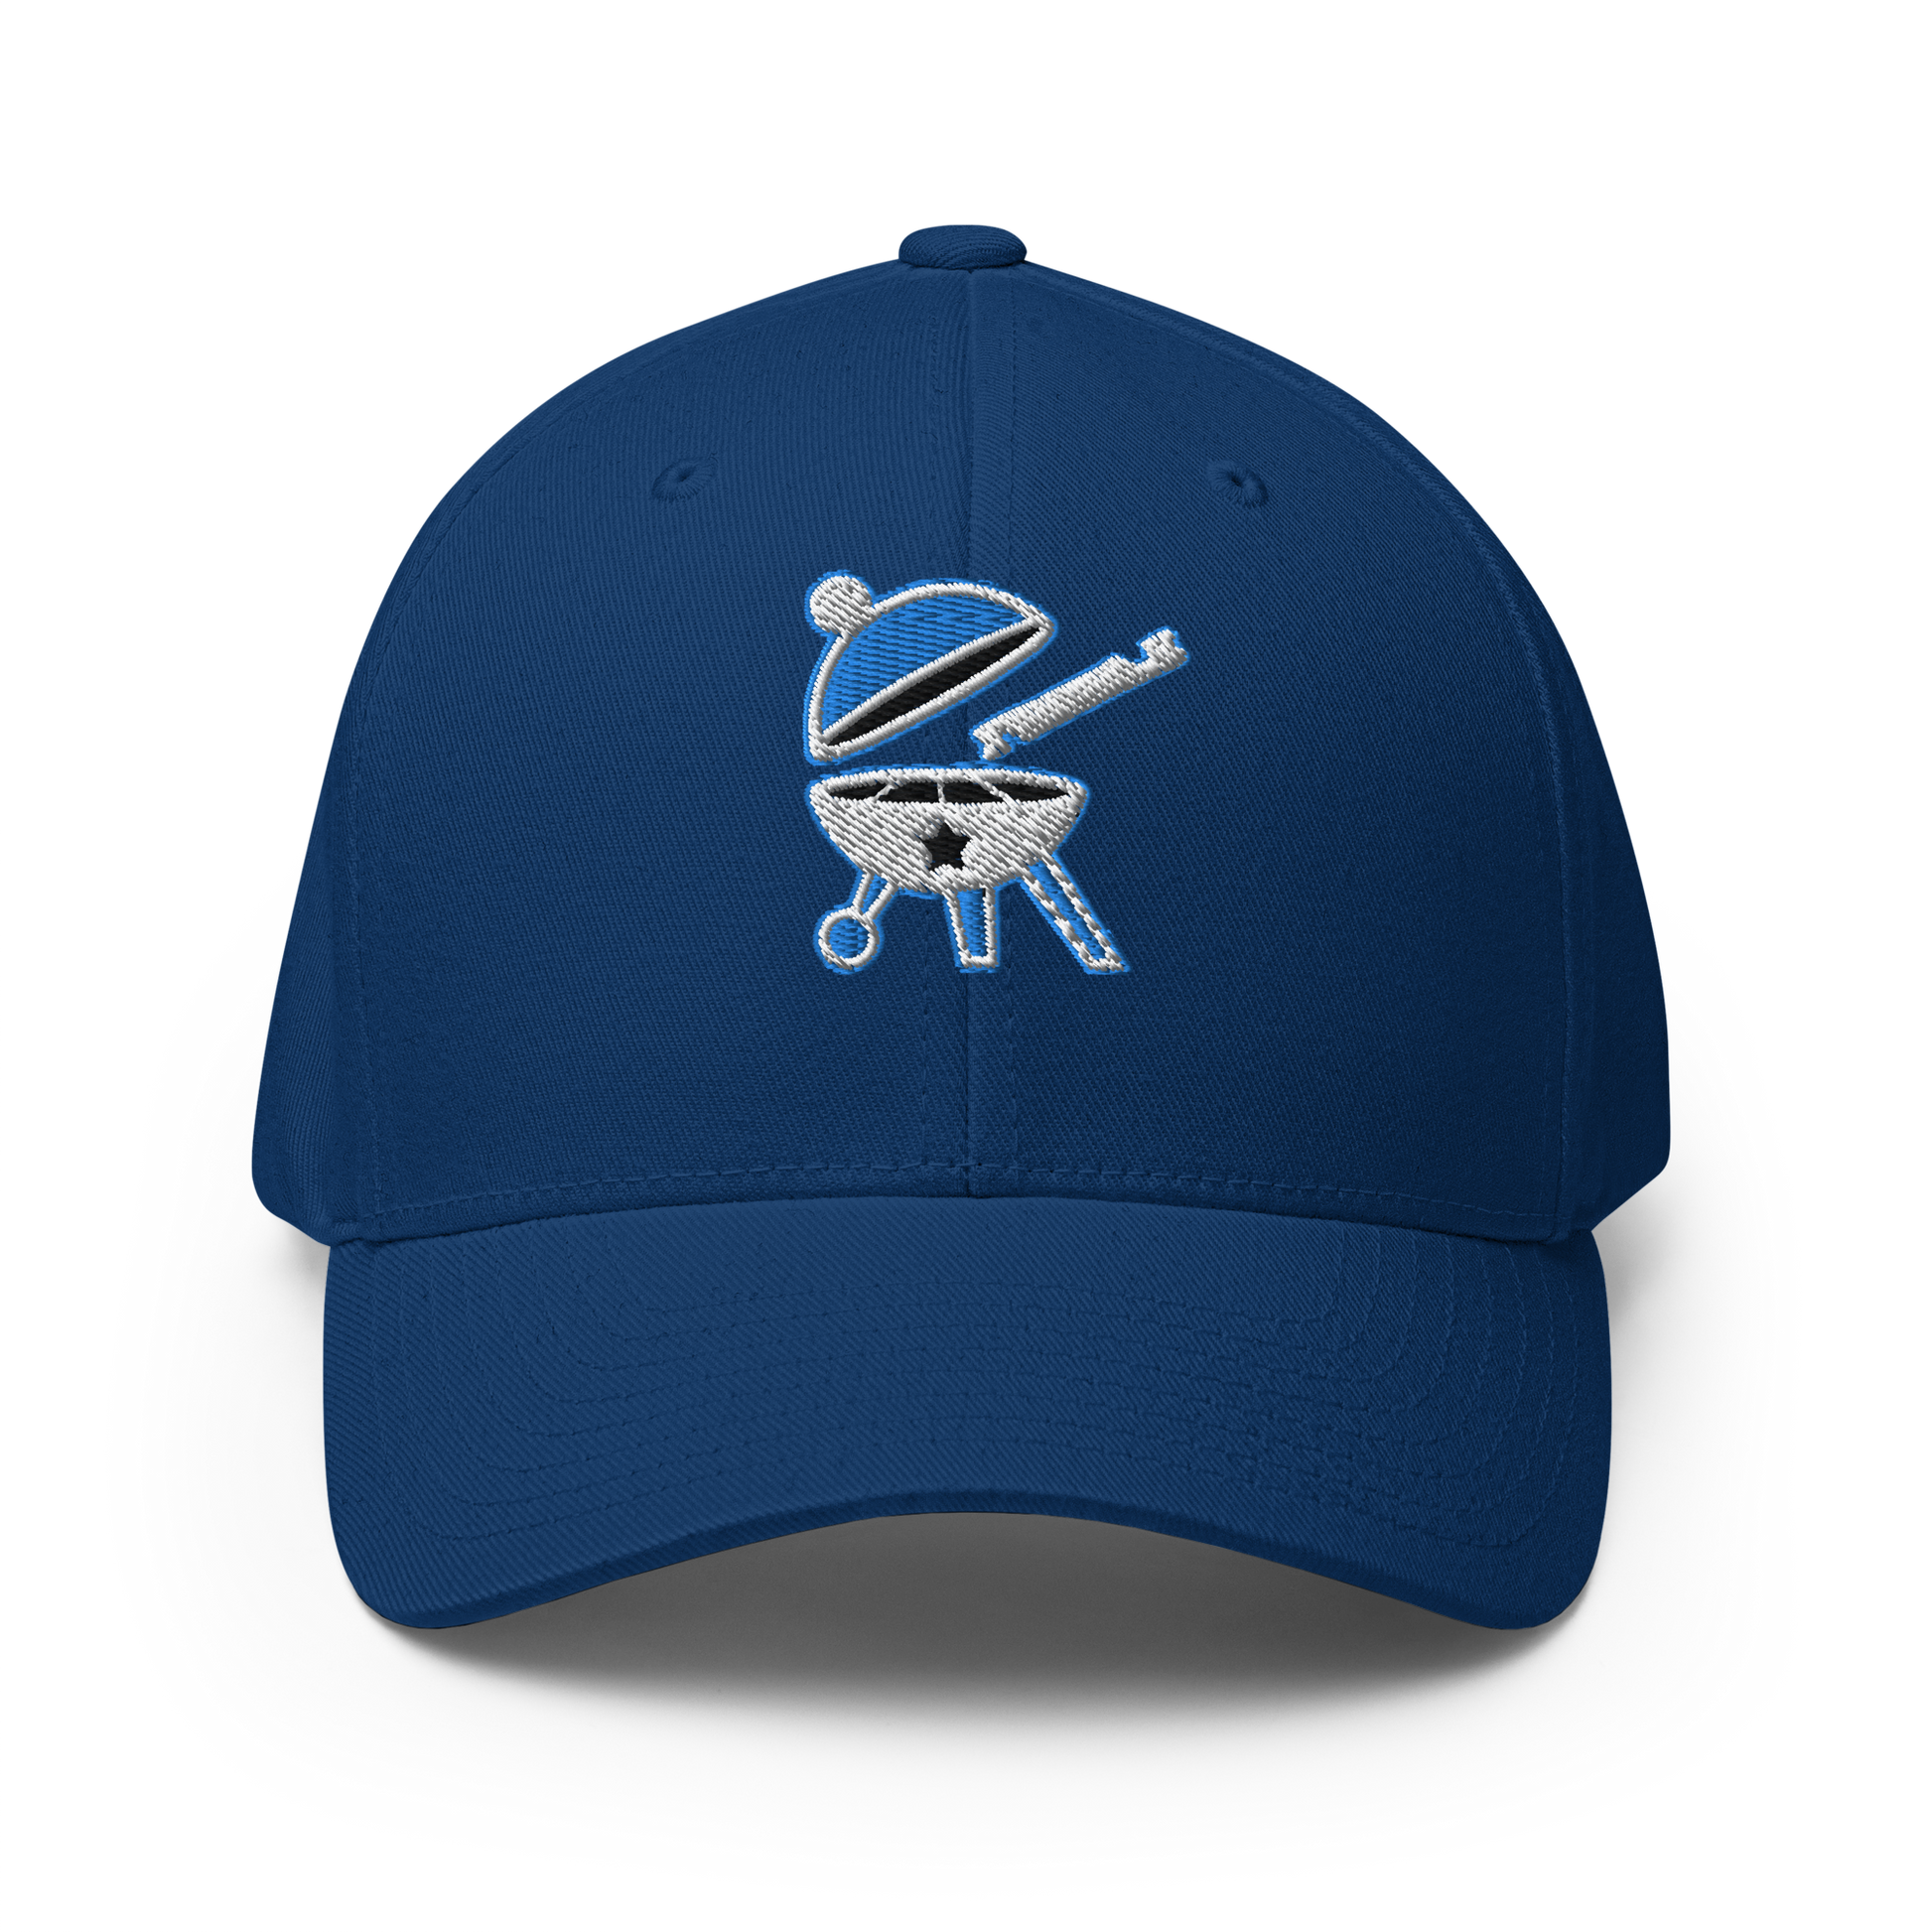 Blue baseball cap with the BBQ Pic logo on it which is a round, open BBQ with a BBQ Pic about to clean it.